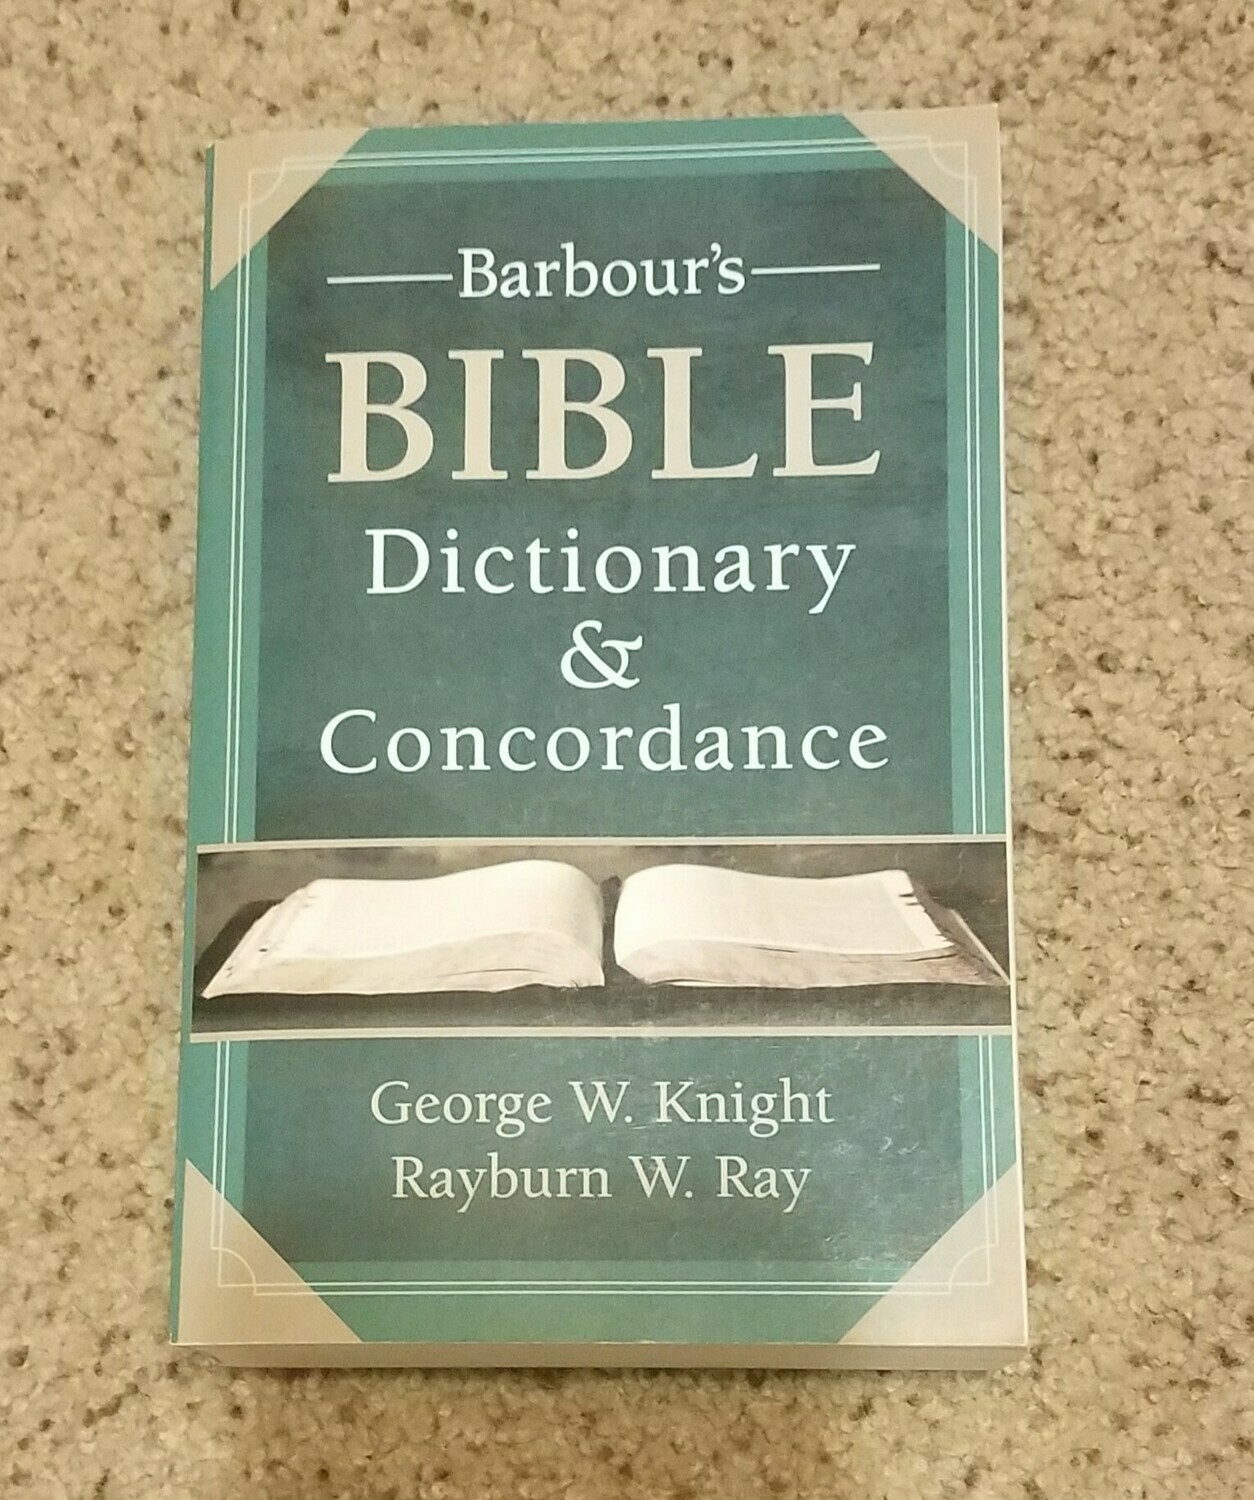 Barbour's Bible Dictionary and Concordance by George W. Knight and Rayburn W. Ray